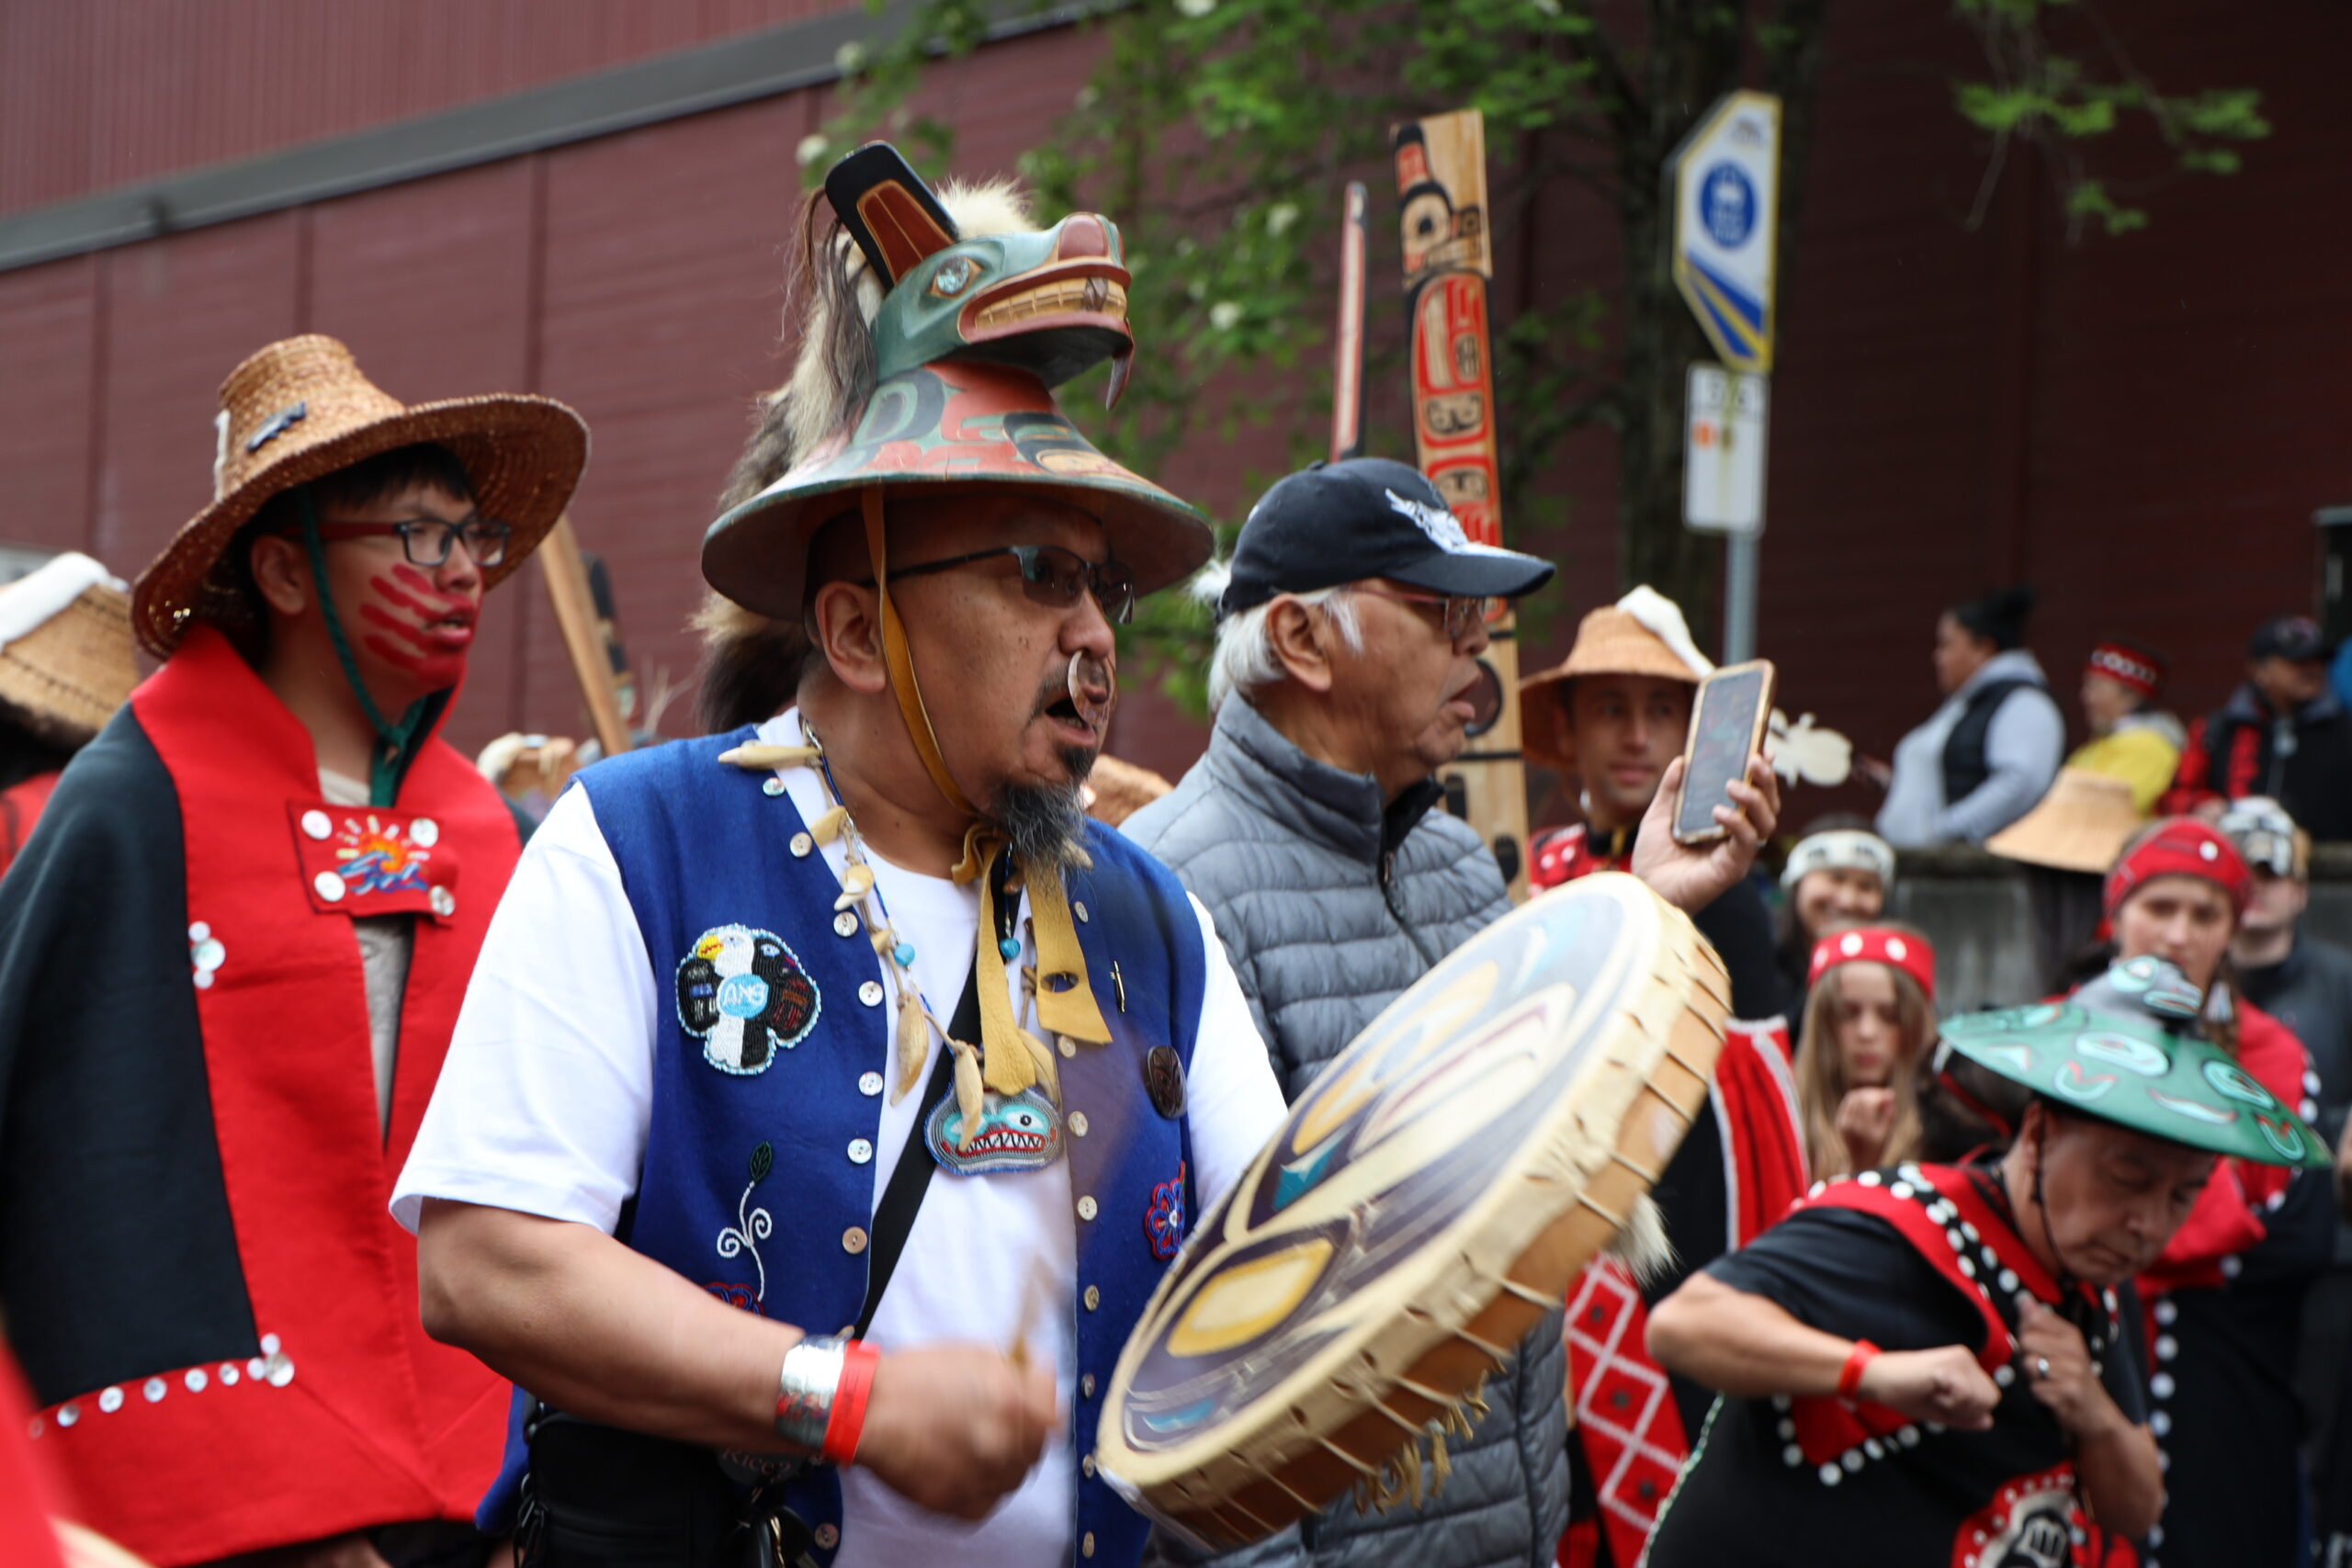 a group of people drum and sing in the street for a celebration